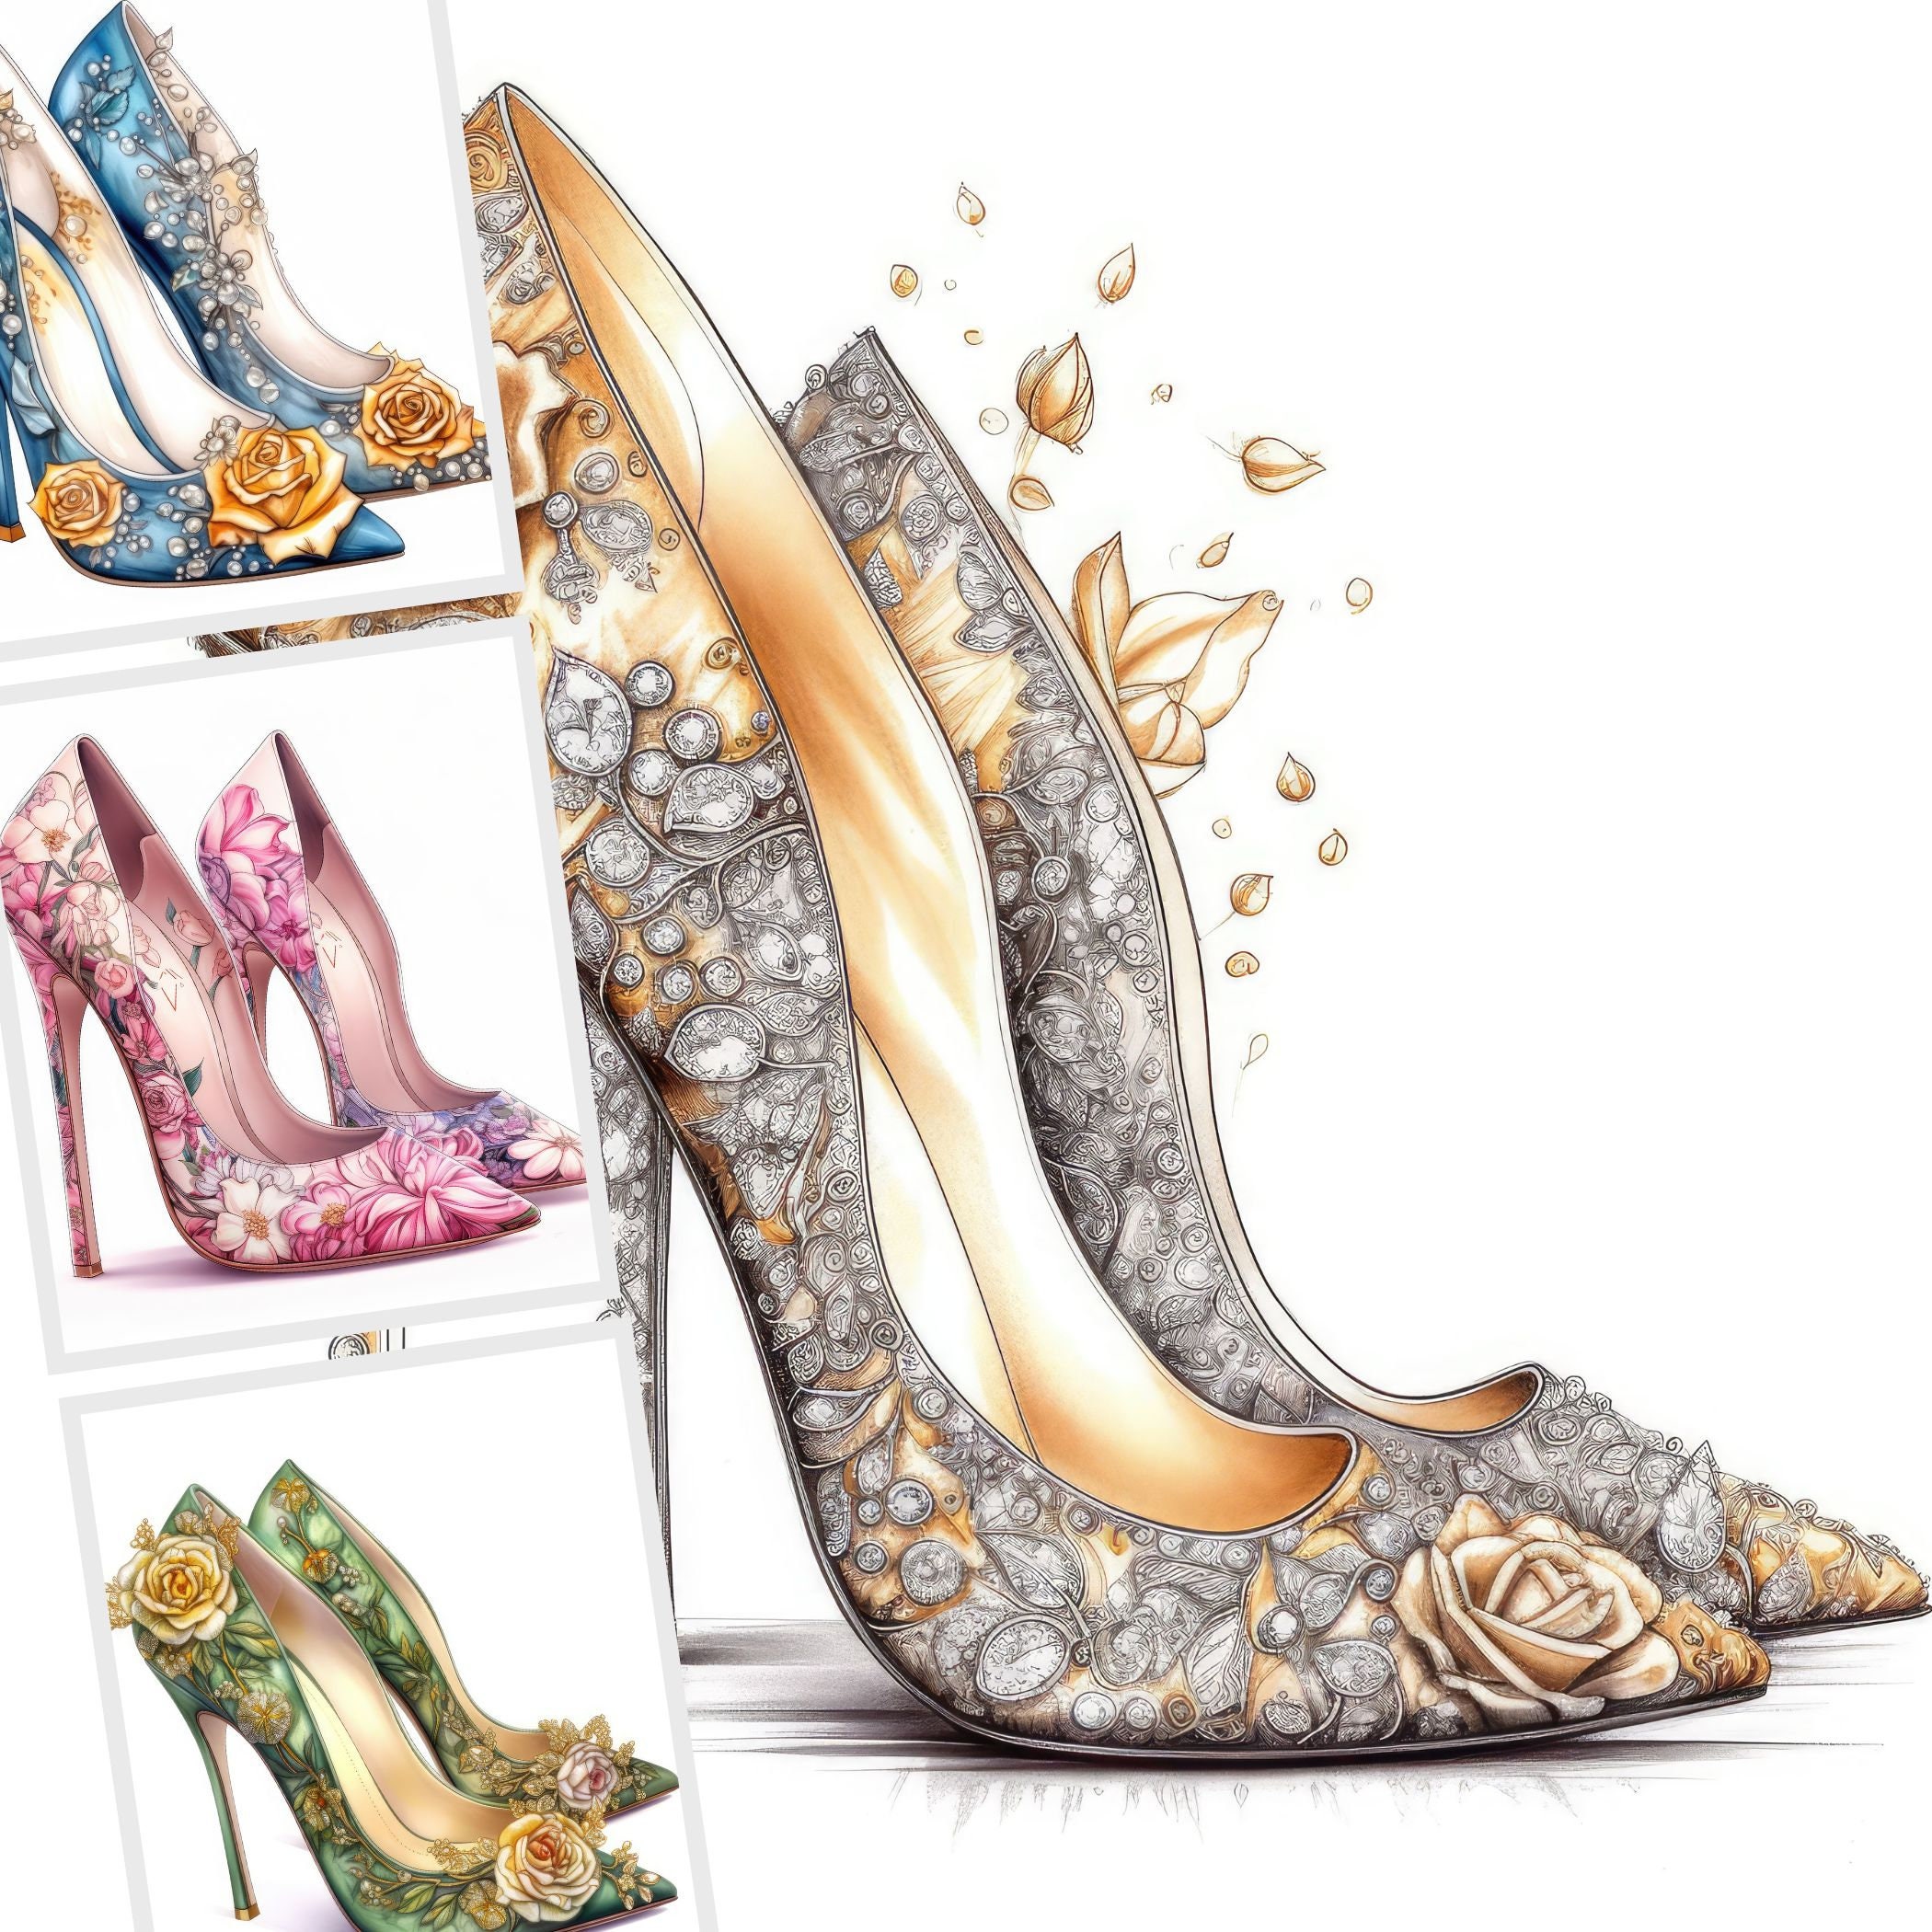 gold and peach heels for prom